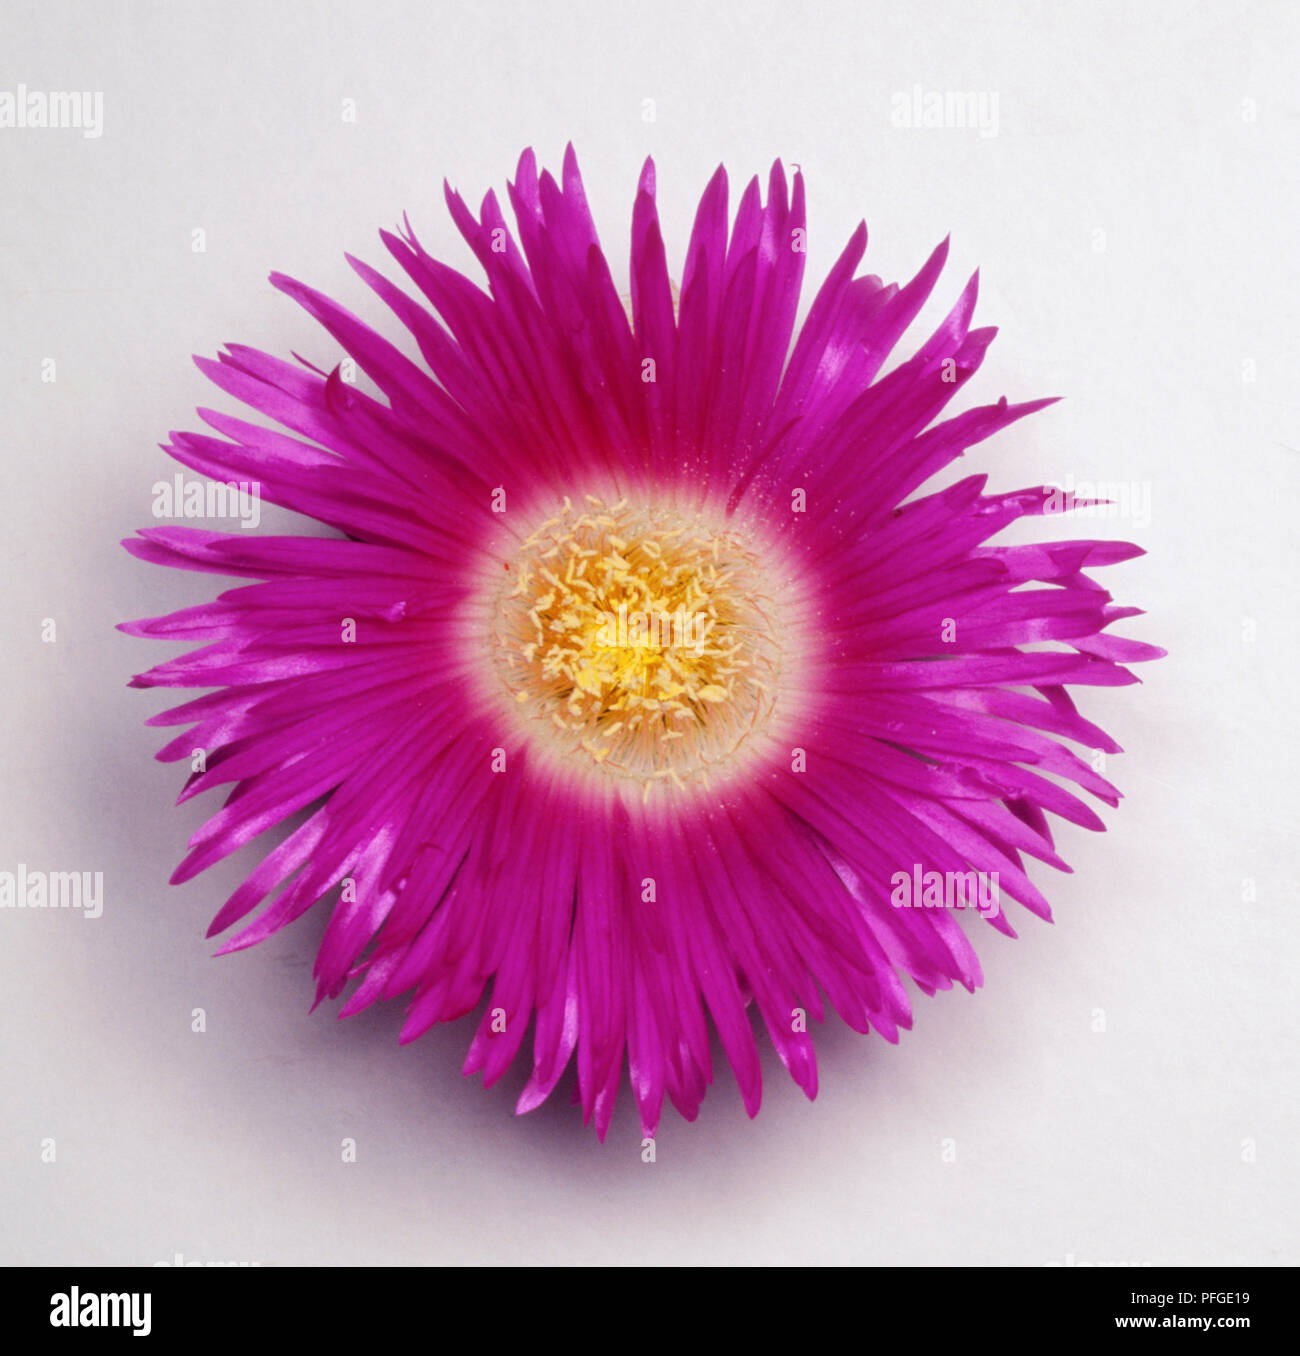 Carpobrotus edulis, Hottentot Fig, flower head with pink-purple thin petals and yellow stamens. Stock Photo